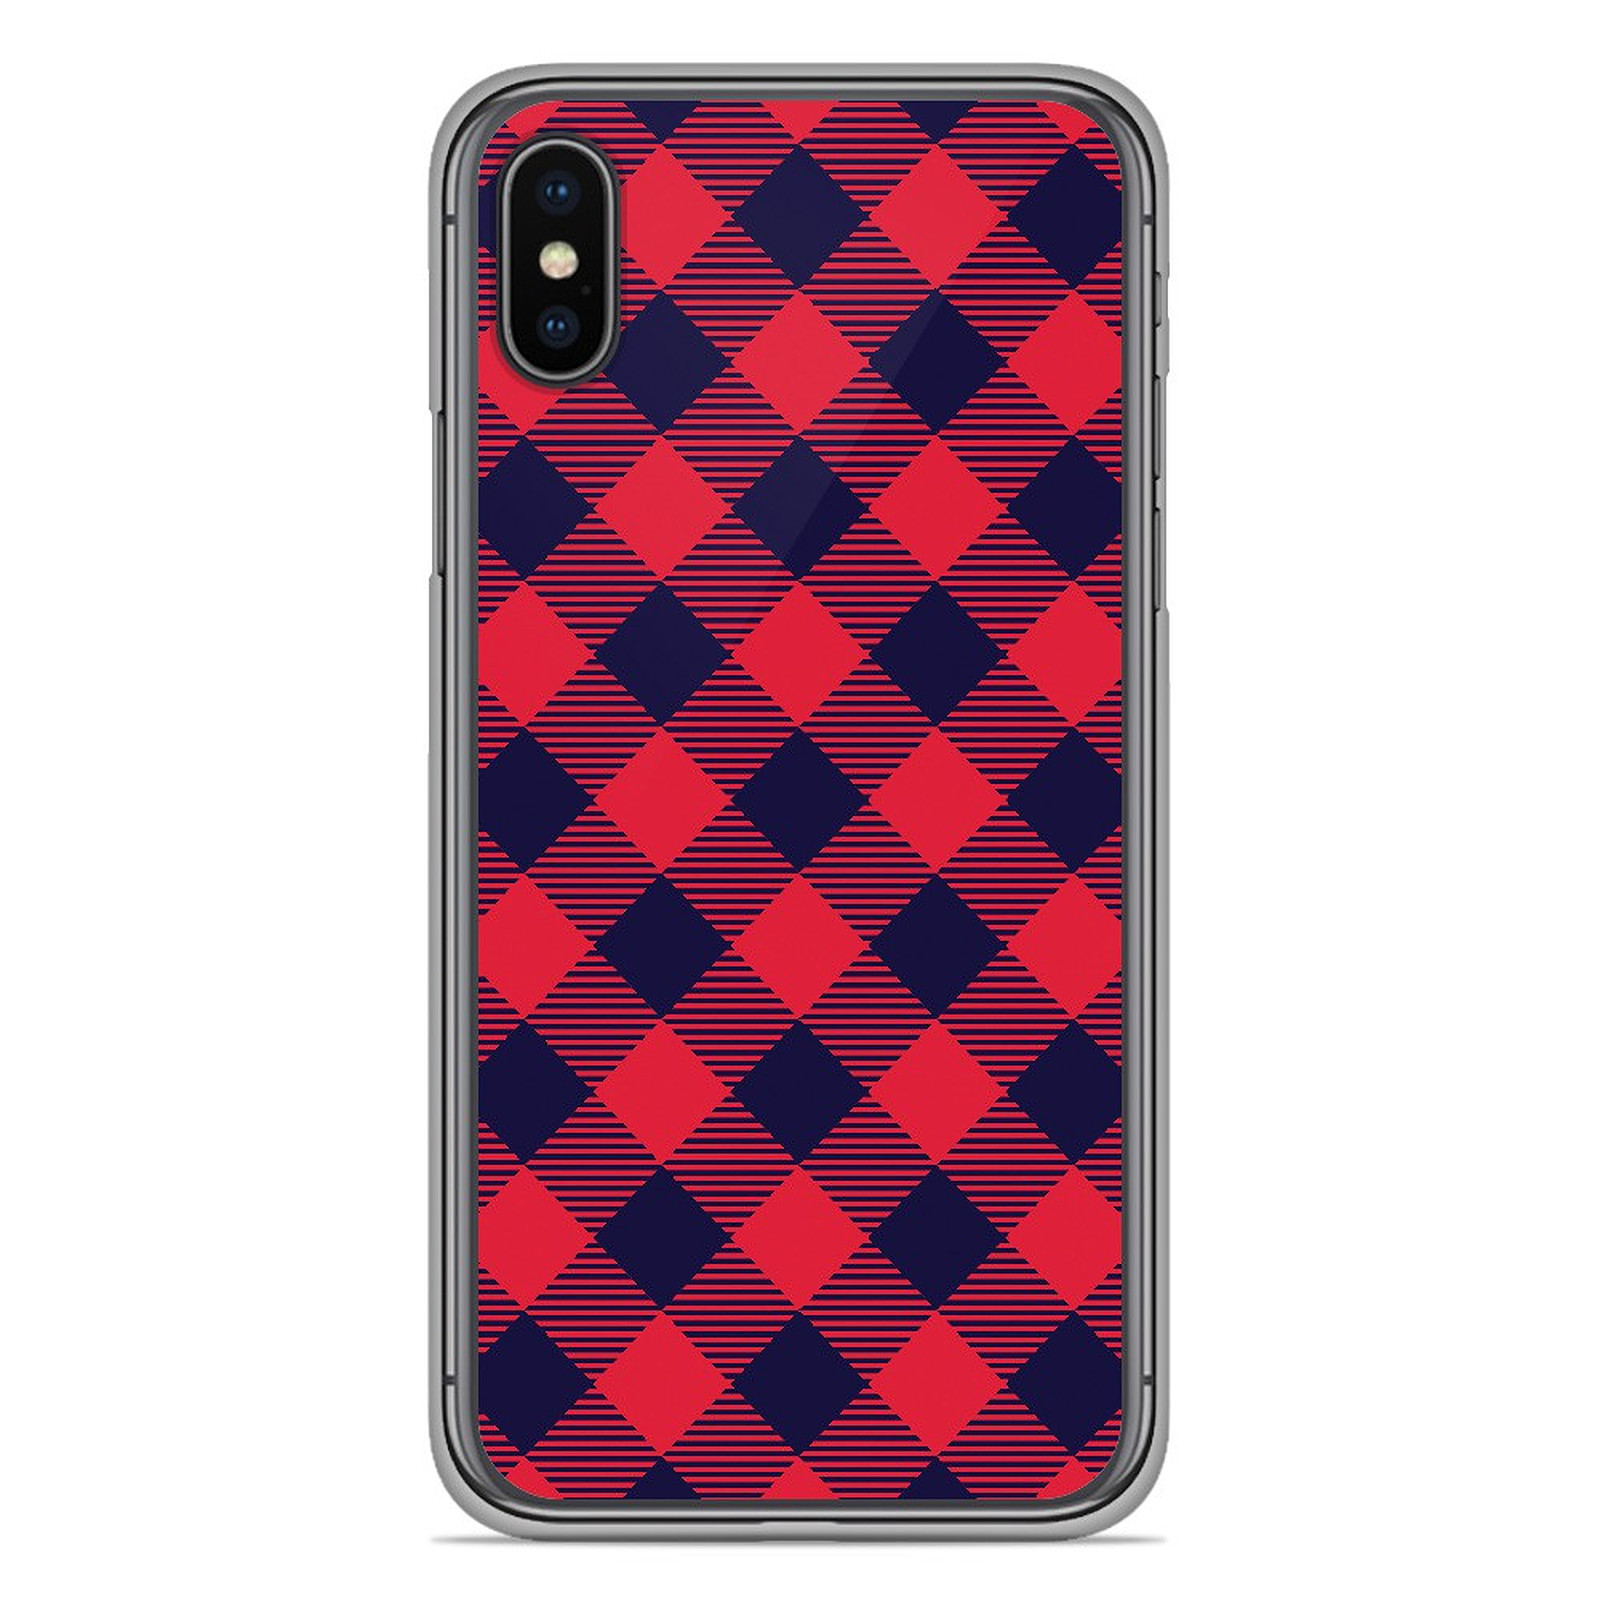 1001 Coques Coque silicone gel Apple iPhone XS Max motif Tartan Rouge - Coque telephone 1001Coques